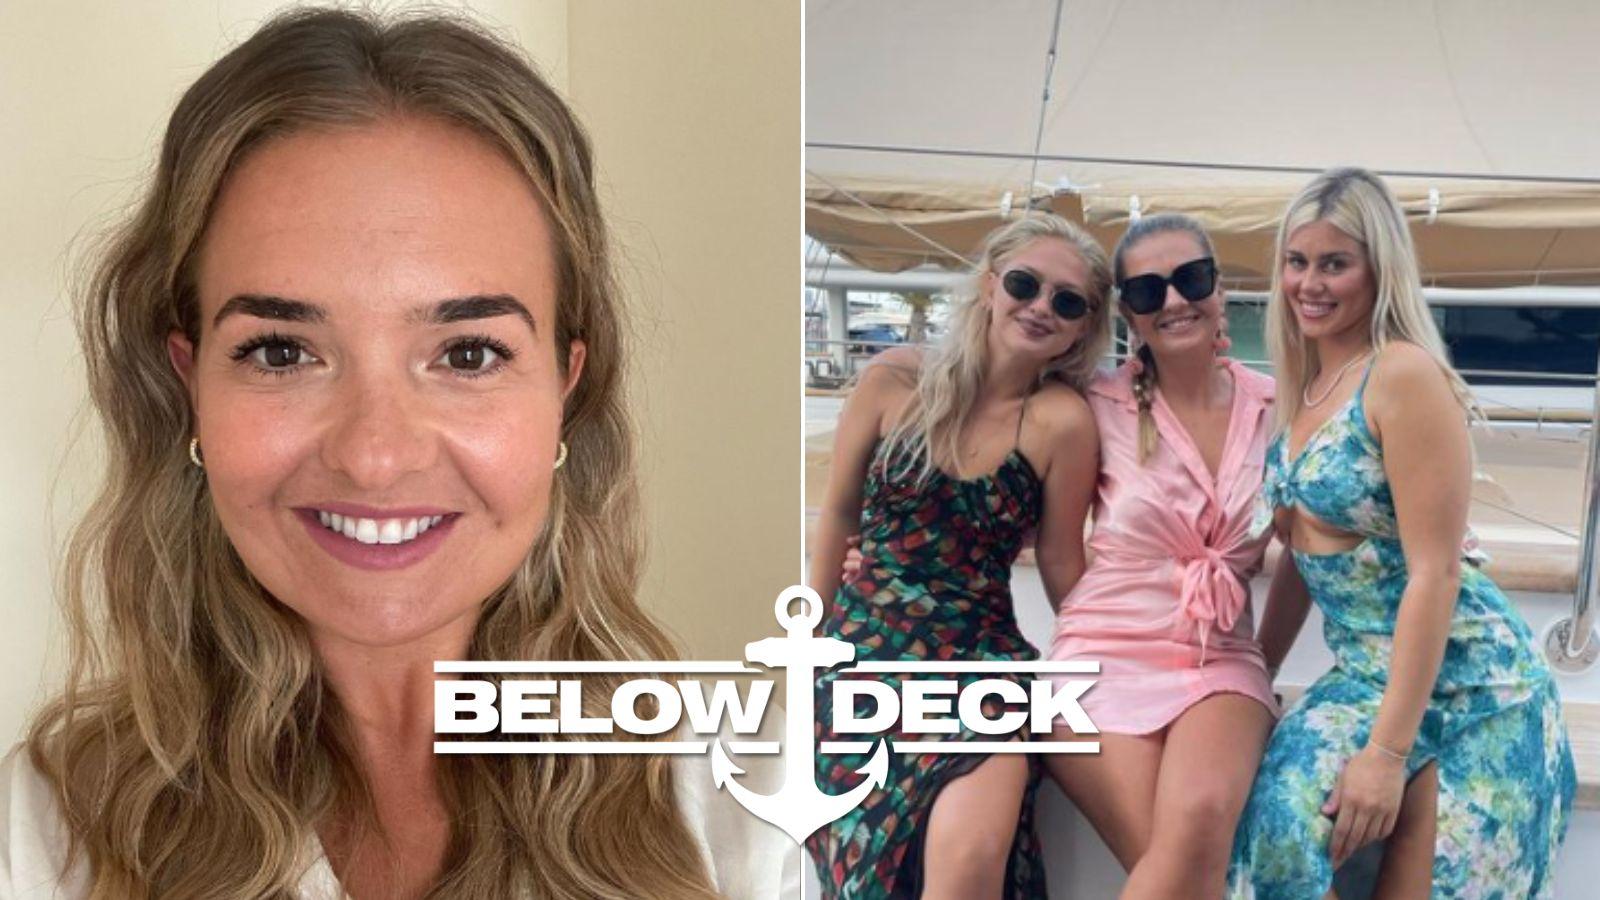 Mads, Daisy, and Lucy from Below Deck Sailing Yacht